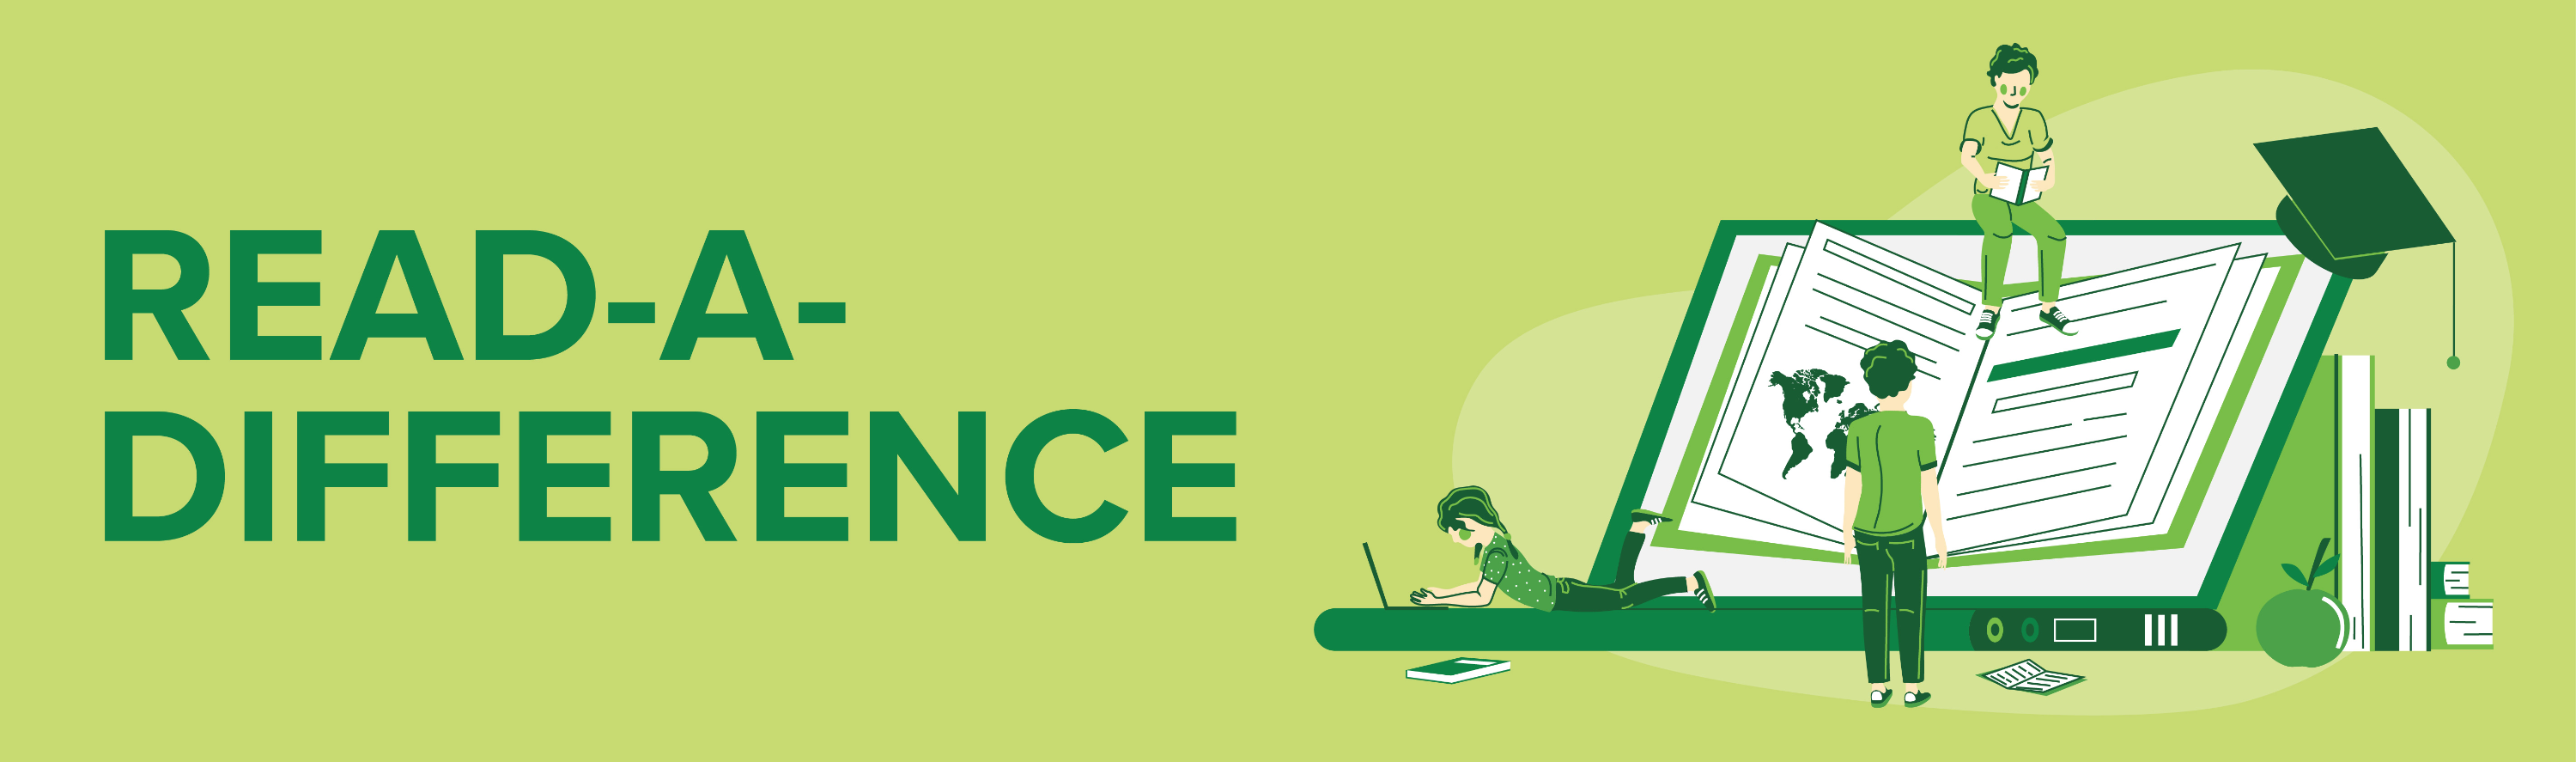 read a difference banner